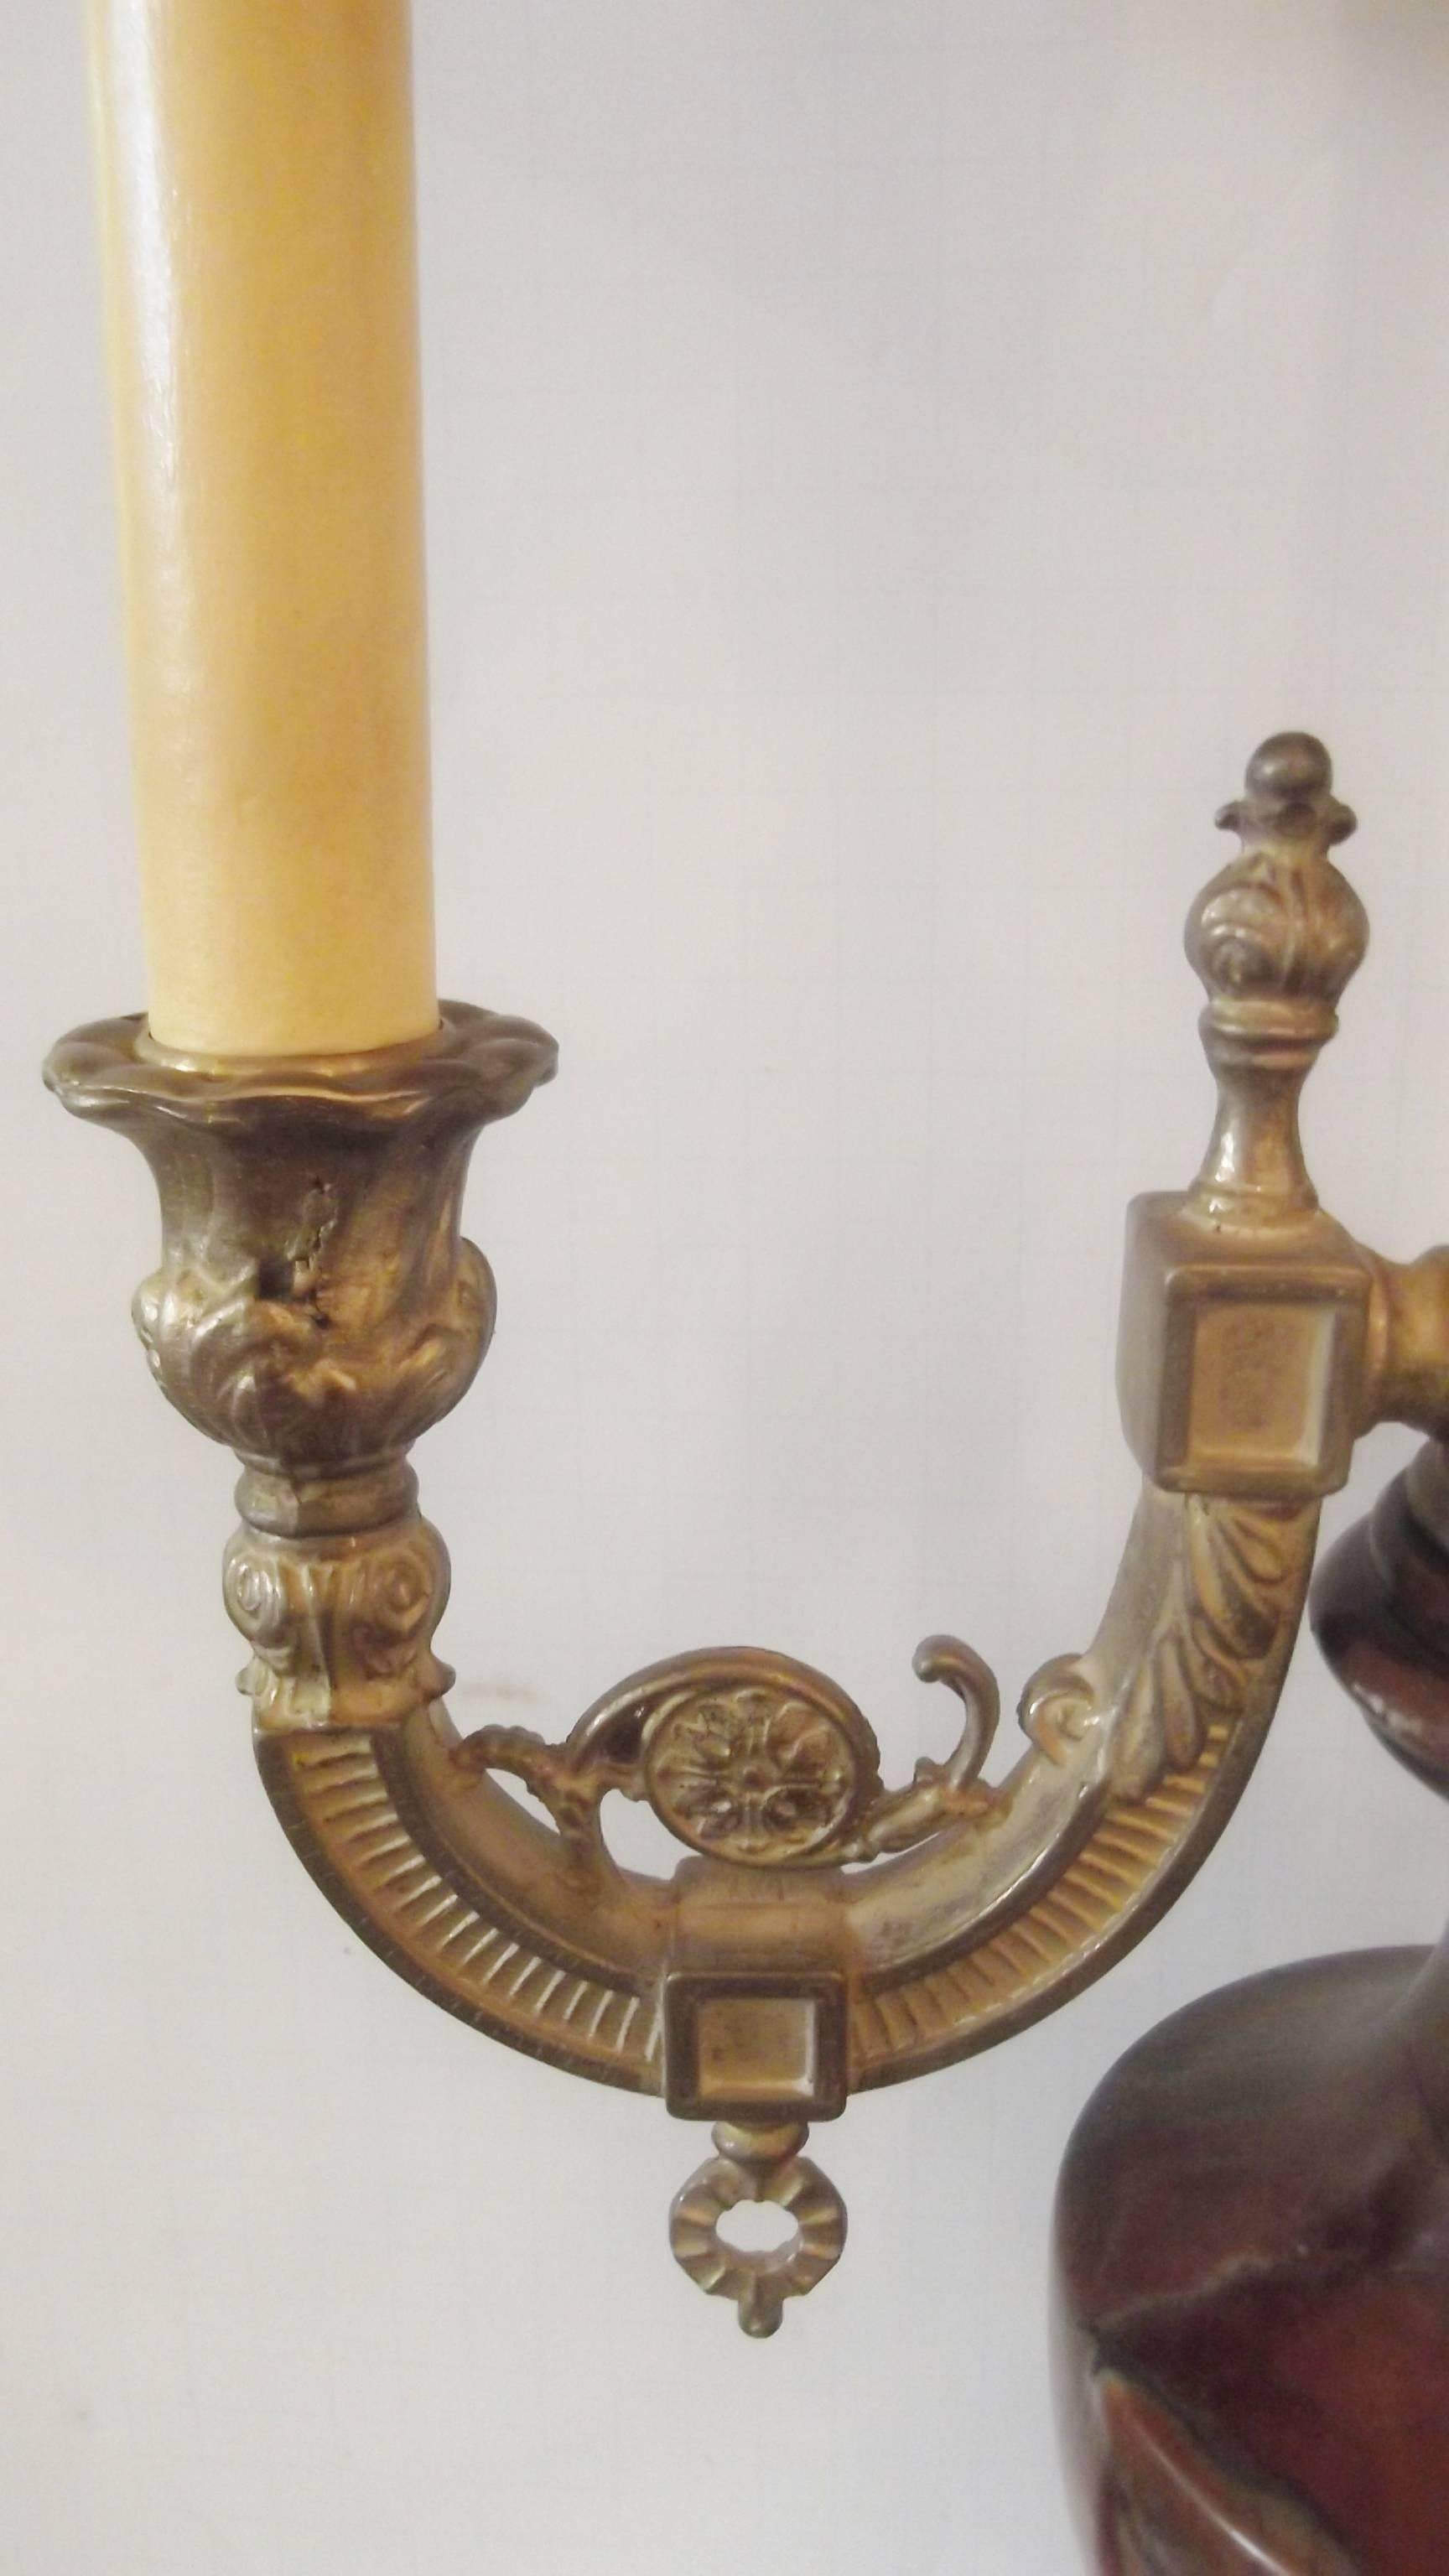 A Decorator lamp with 2 lighted arms.  Classic marble urn body resting on a pedestal base.  Gilt brass arms with tall gilt spire center.  Extra bright for a desk lamp with the double lights,   Paired with 2 nice pleated shades. 